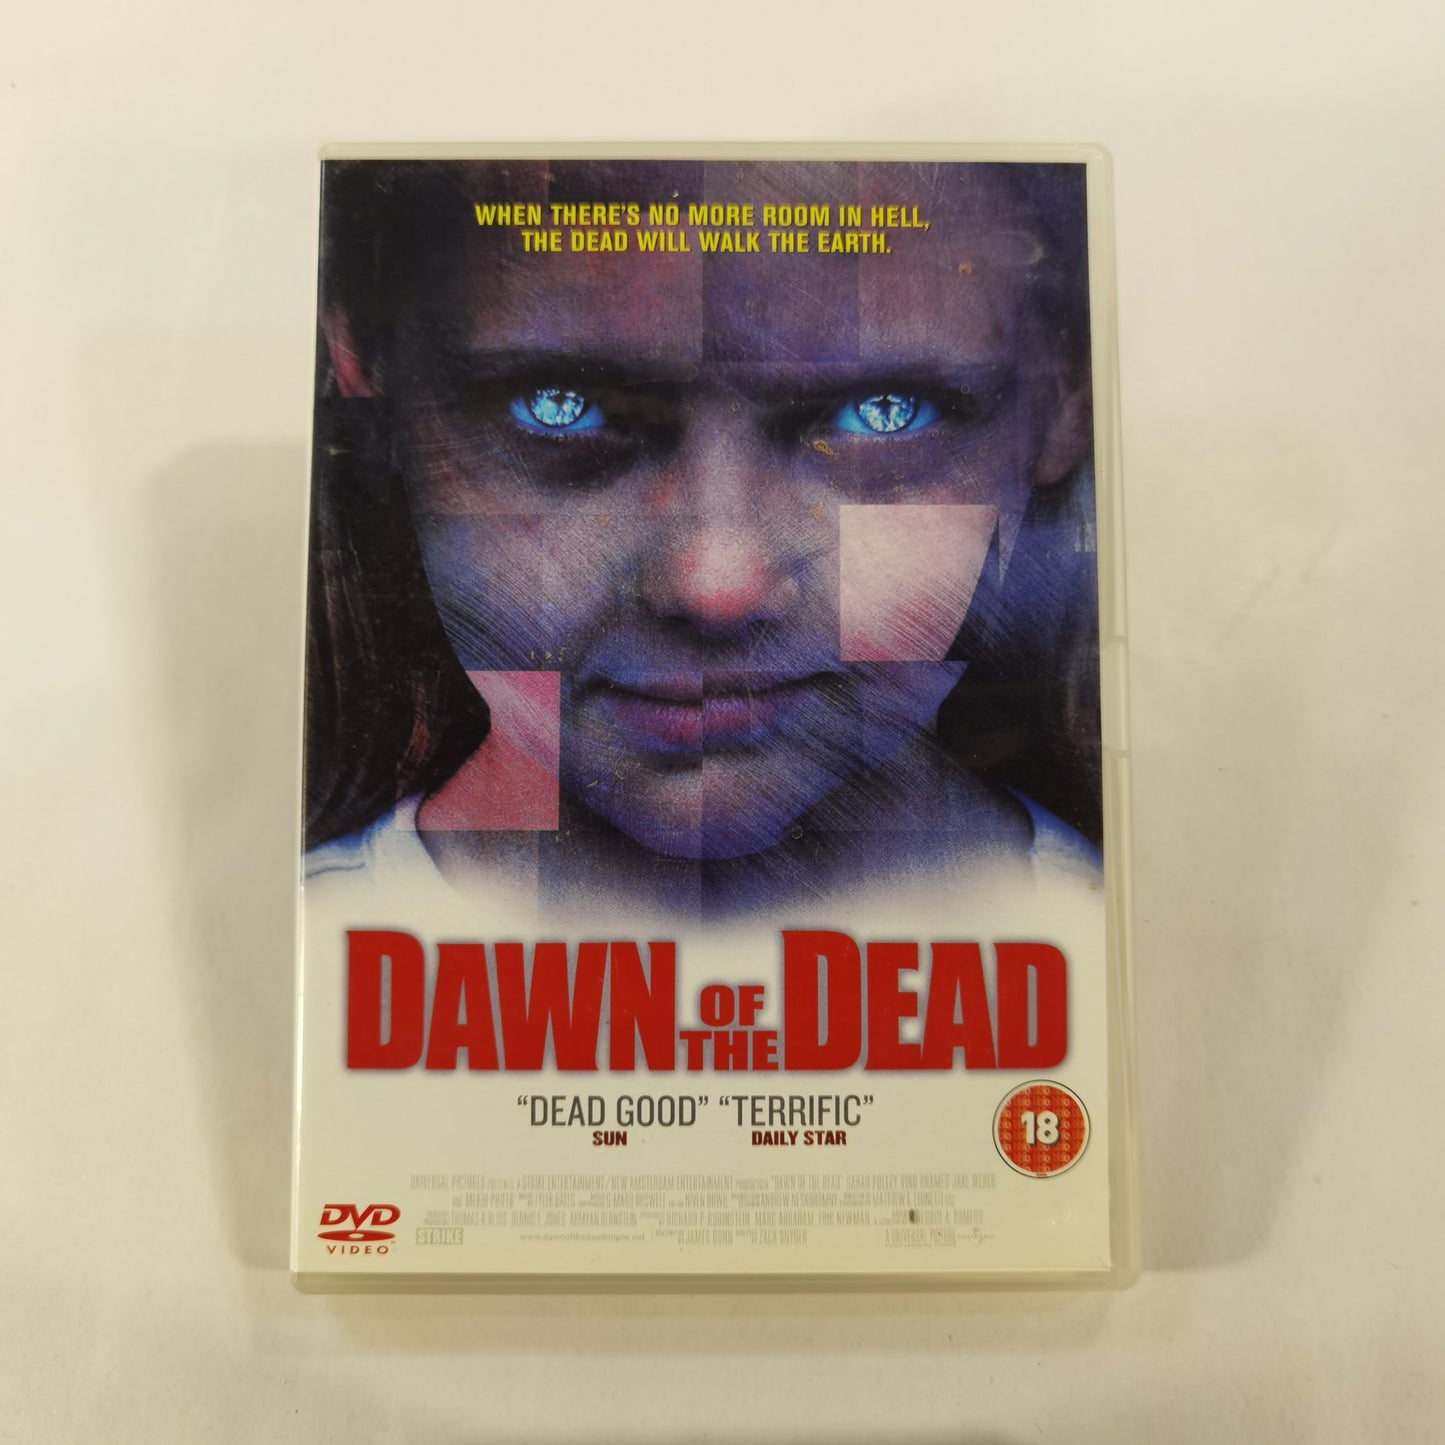 Dawn of the Dead (2004) - DVD UK